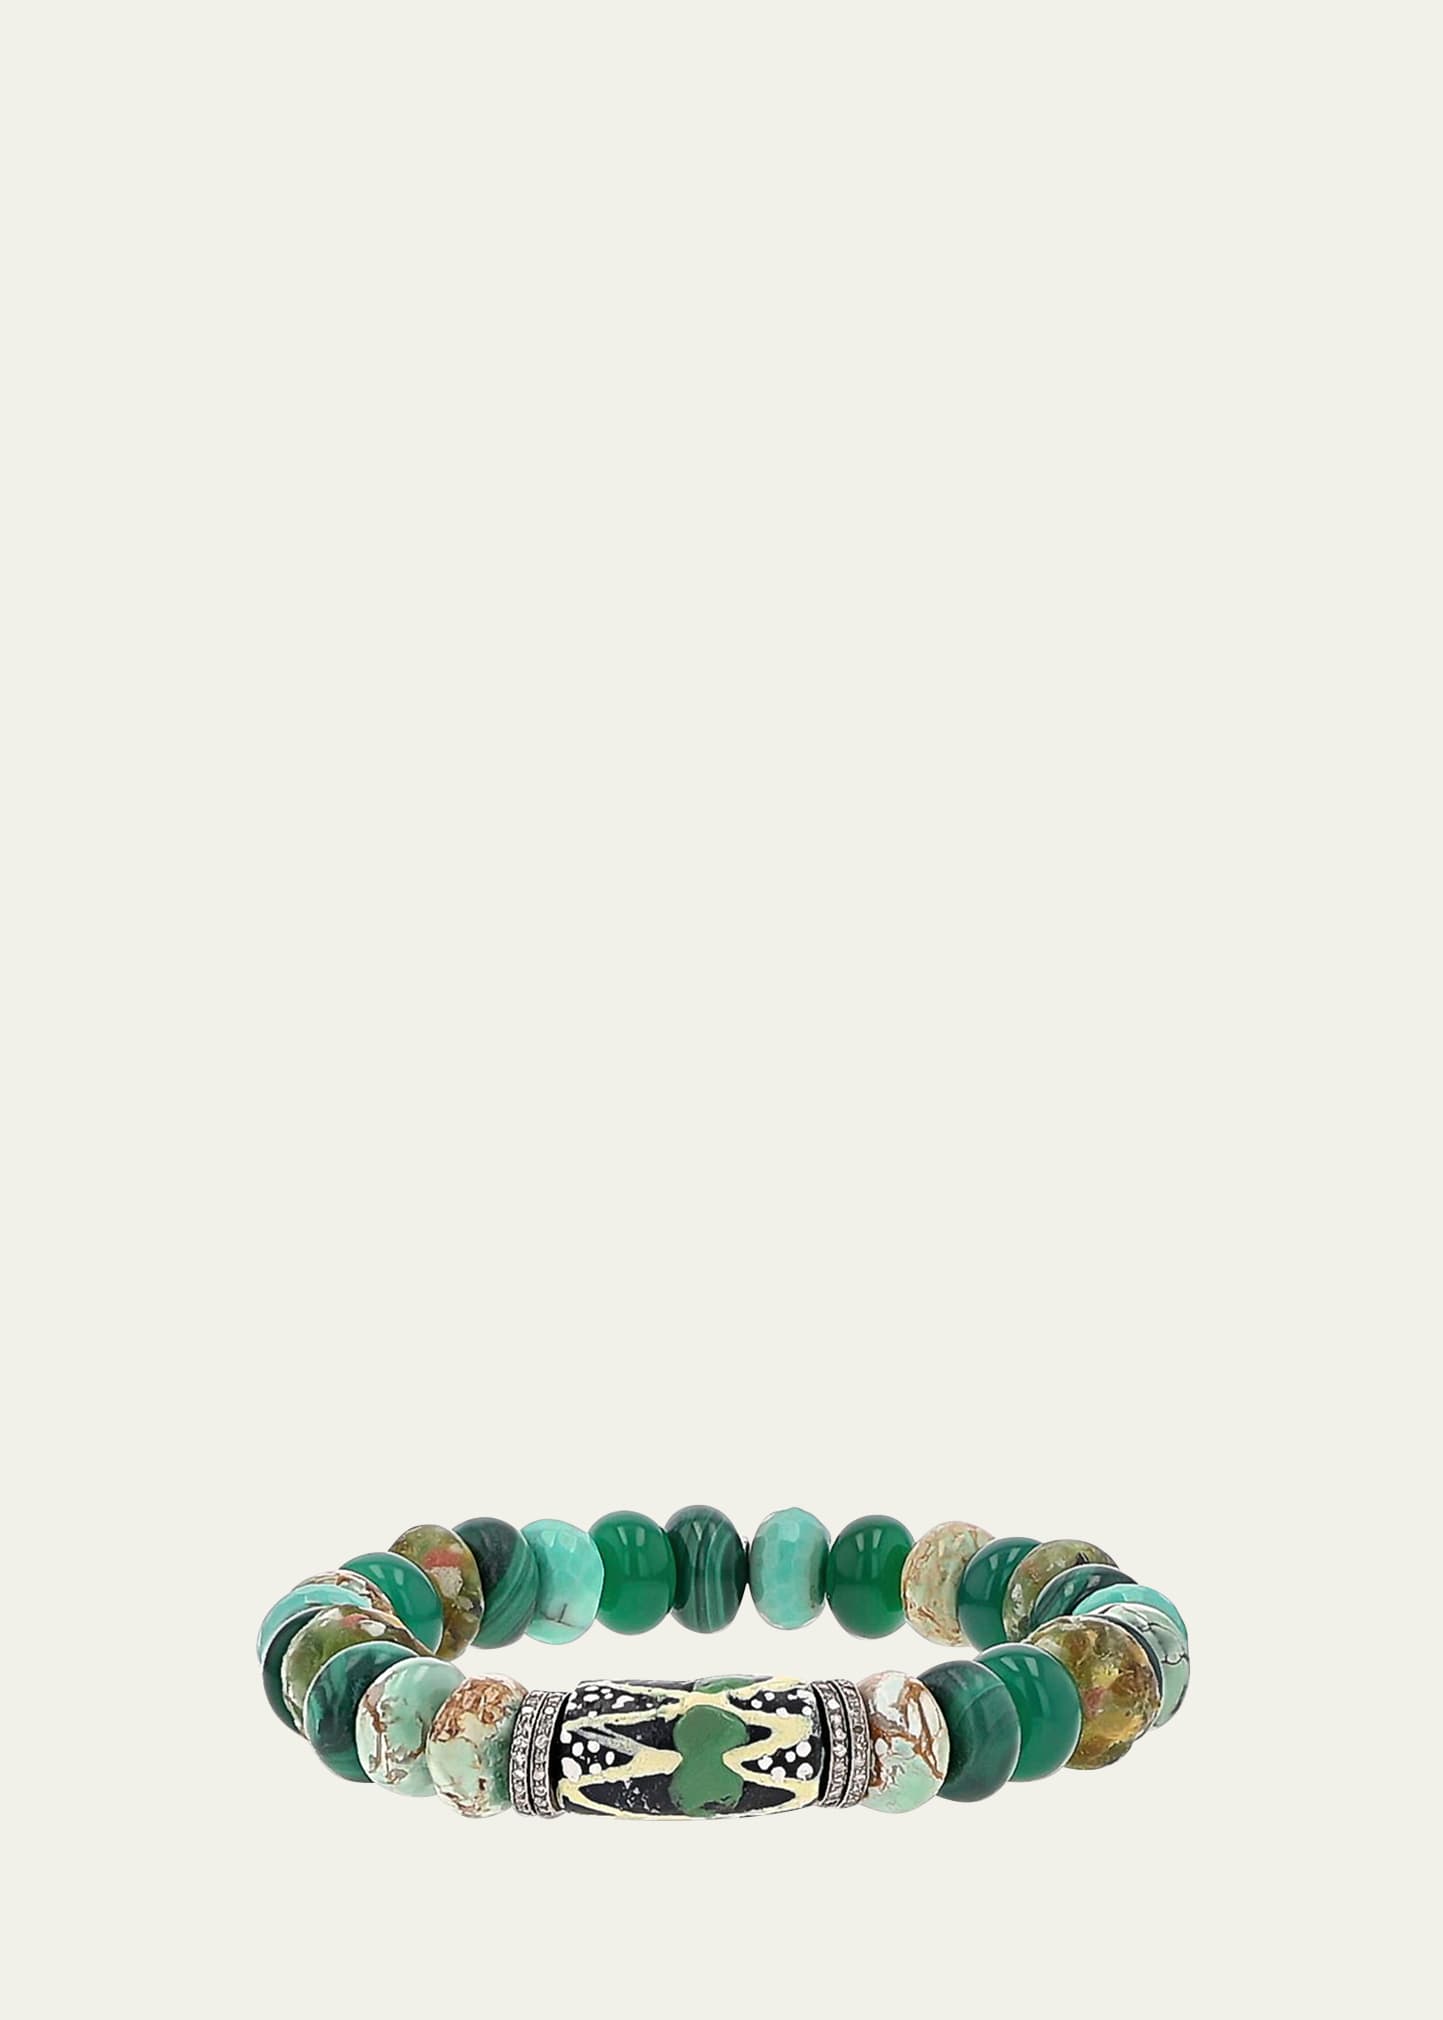 SHERYL LOWE GREEN AFRICAN MIX 10MM BEAD BRACELET WITH PAVE DIAMOND RONDELLES